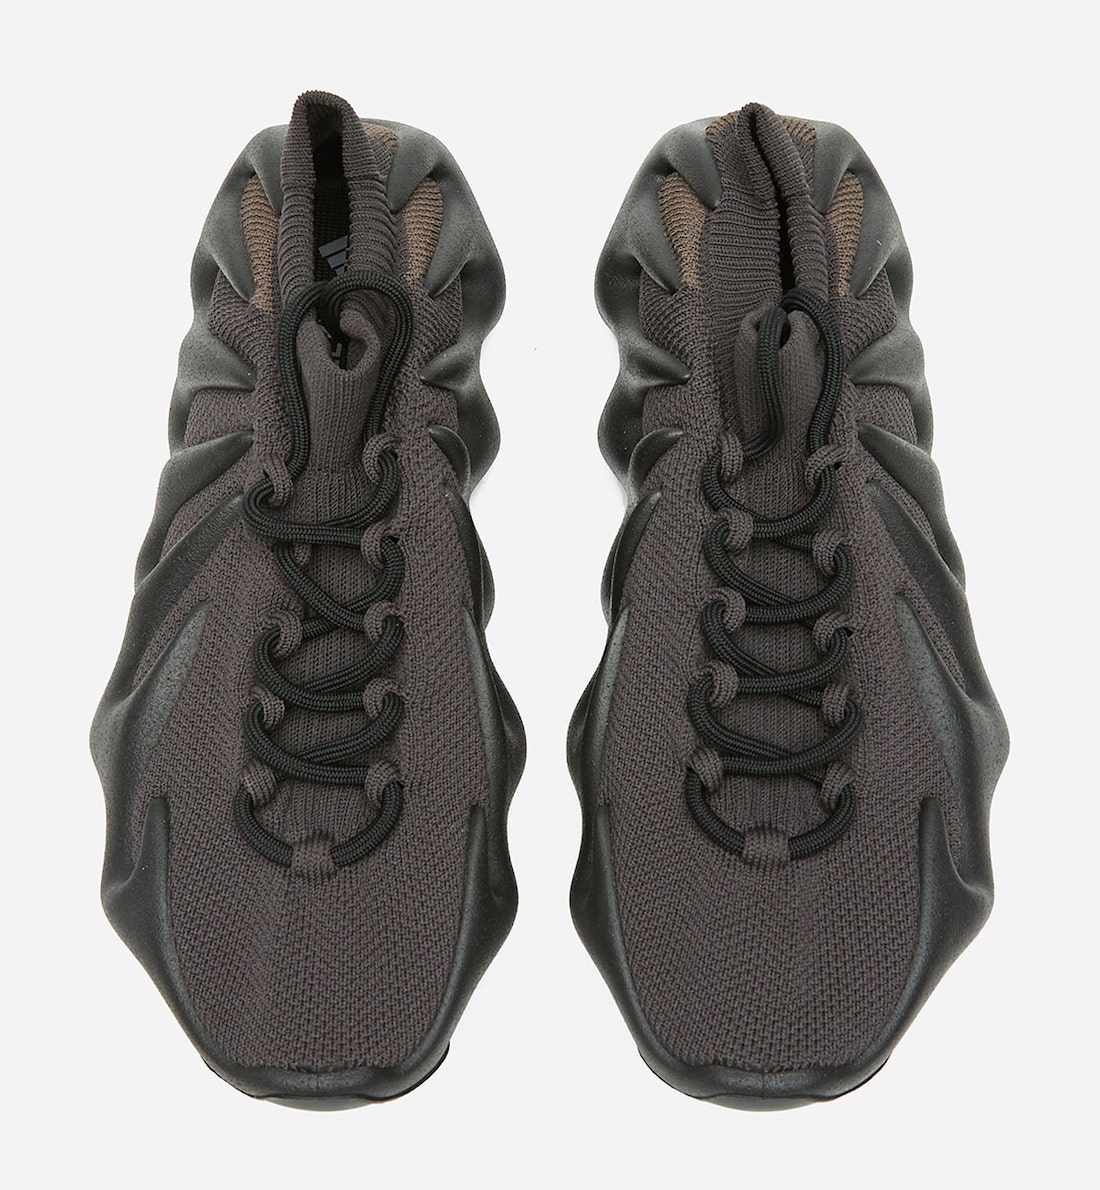 YEEZY 700 V3 Clay Brown Hats GY5386 Release Date